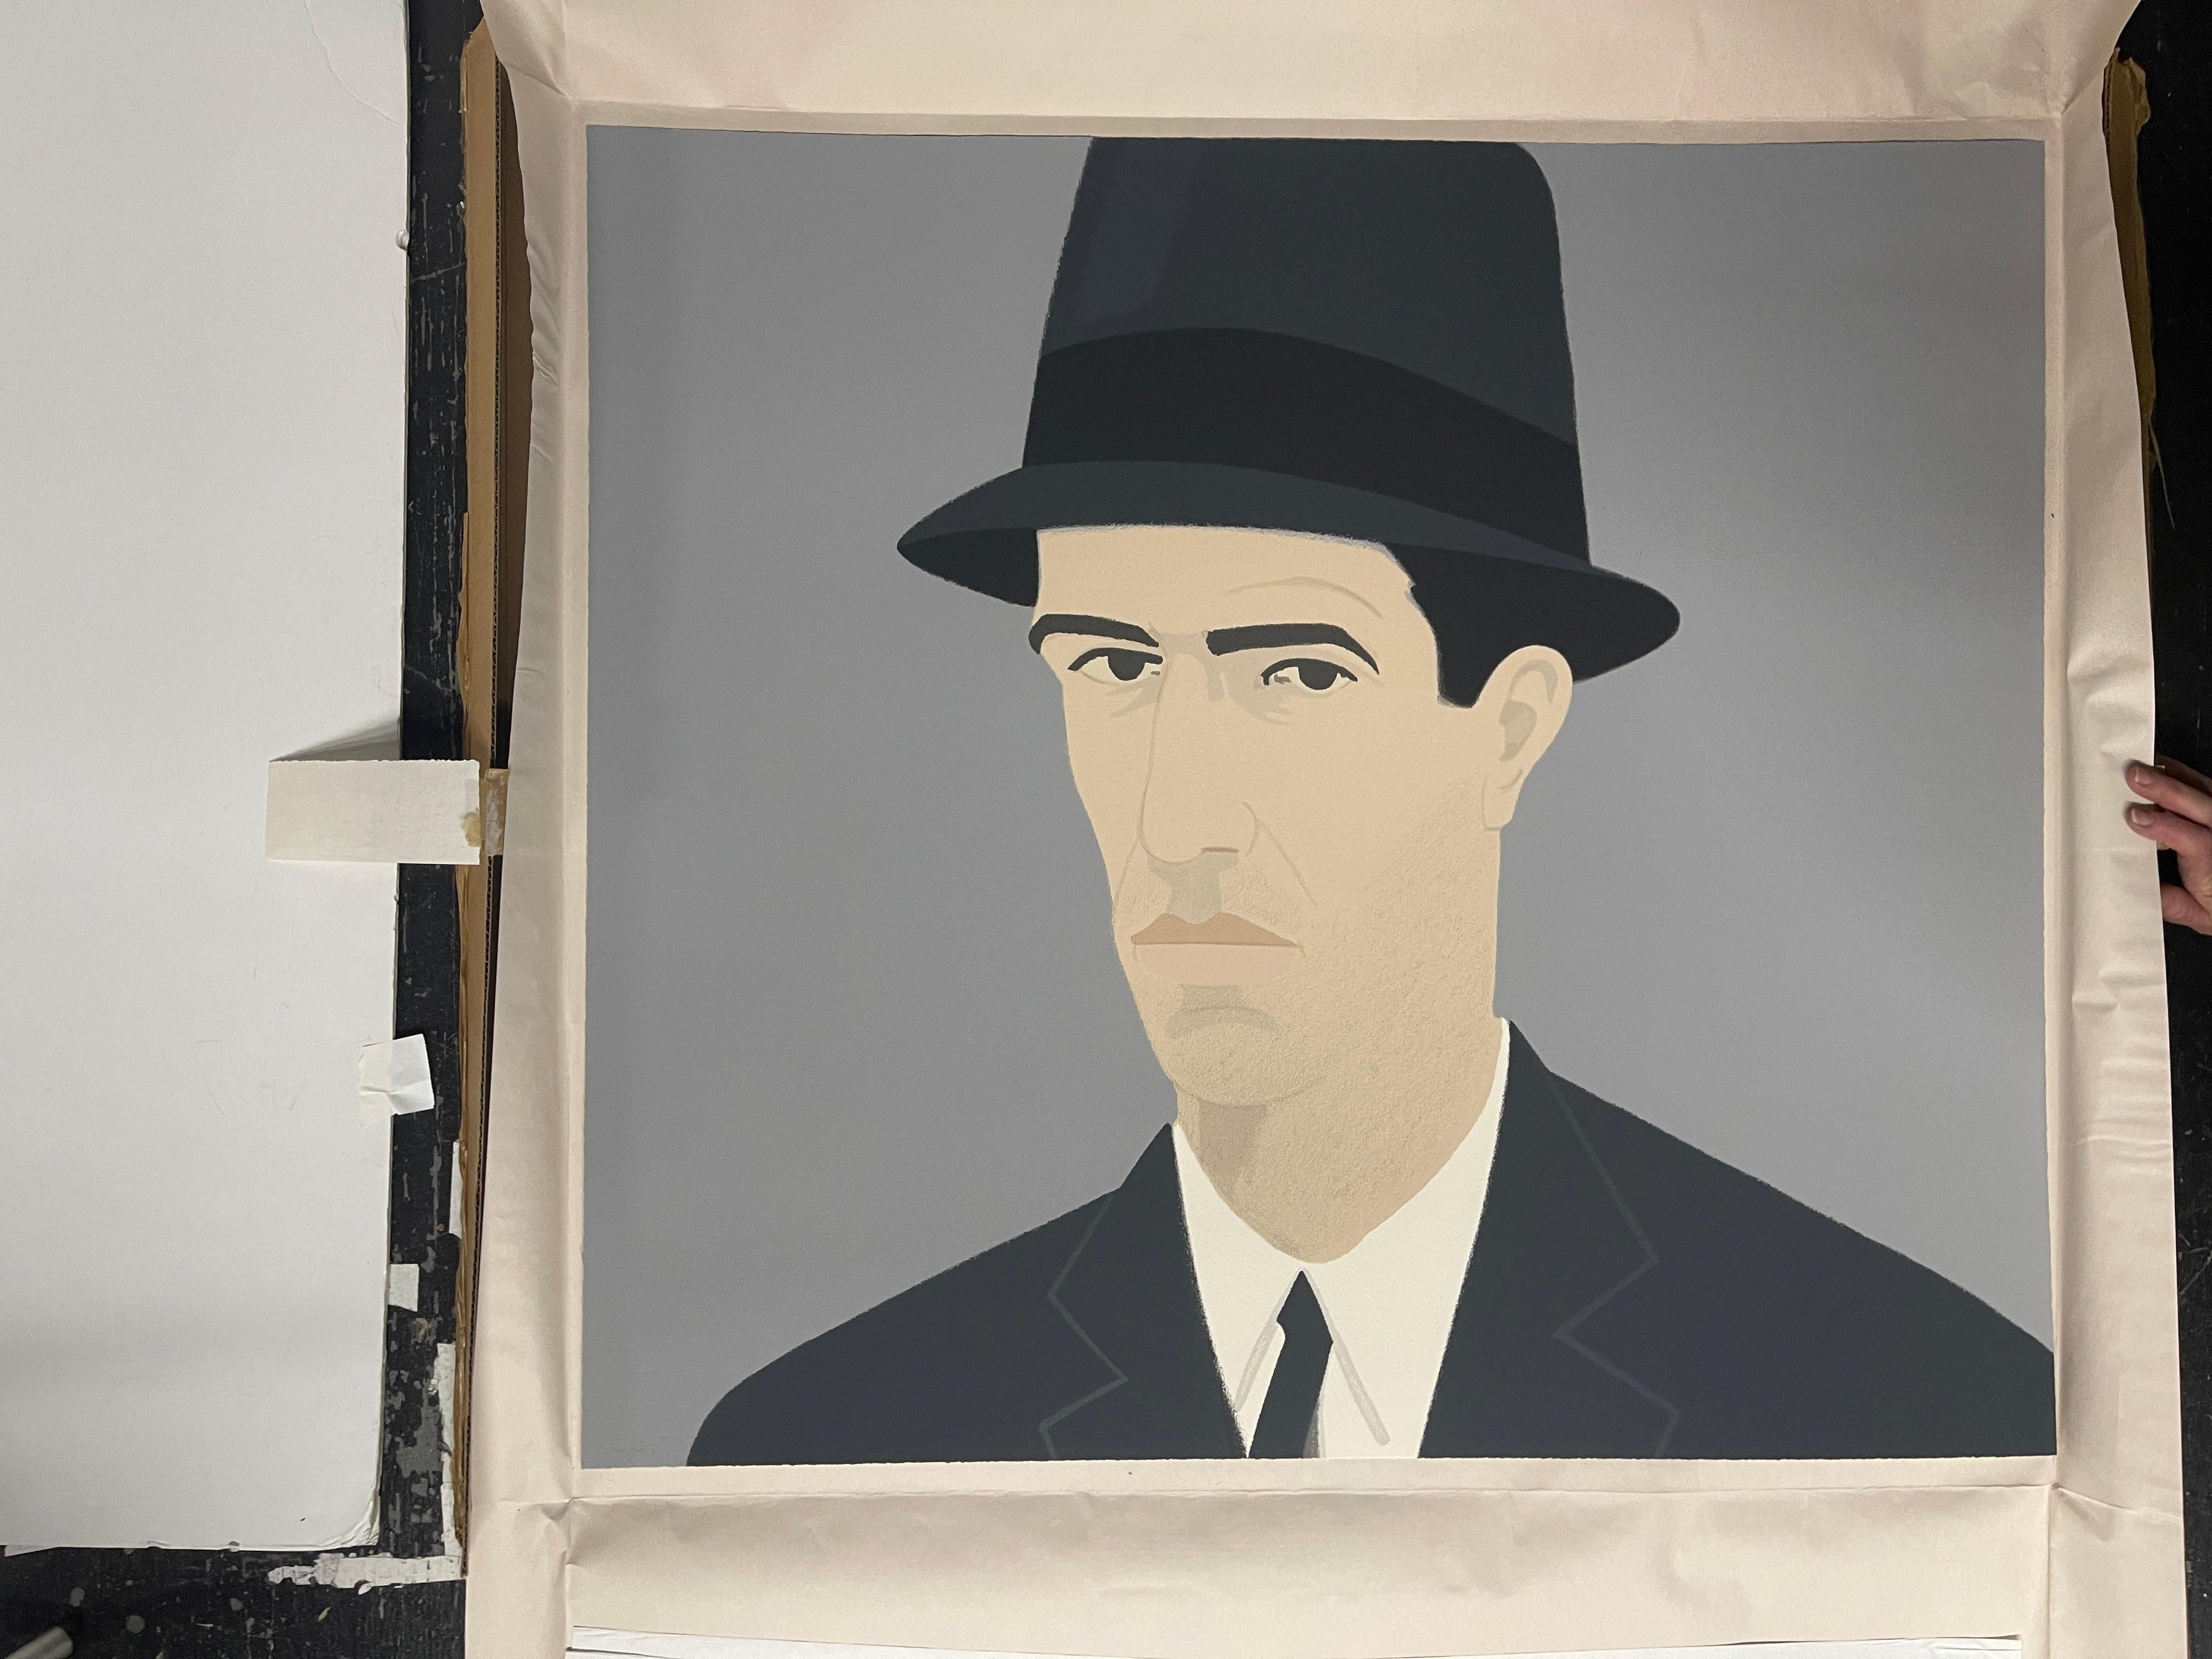 Self-portrait (Passing), 1990, Screenprint by Alex Katz (Limited Edition of 150) For Sale 4